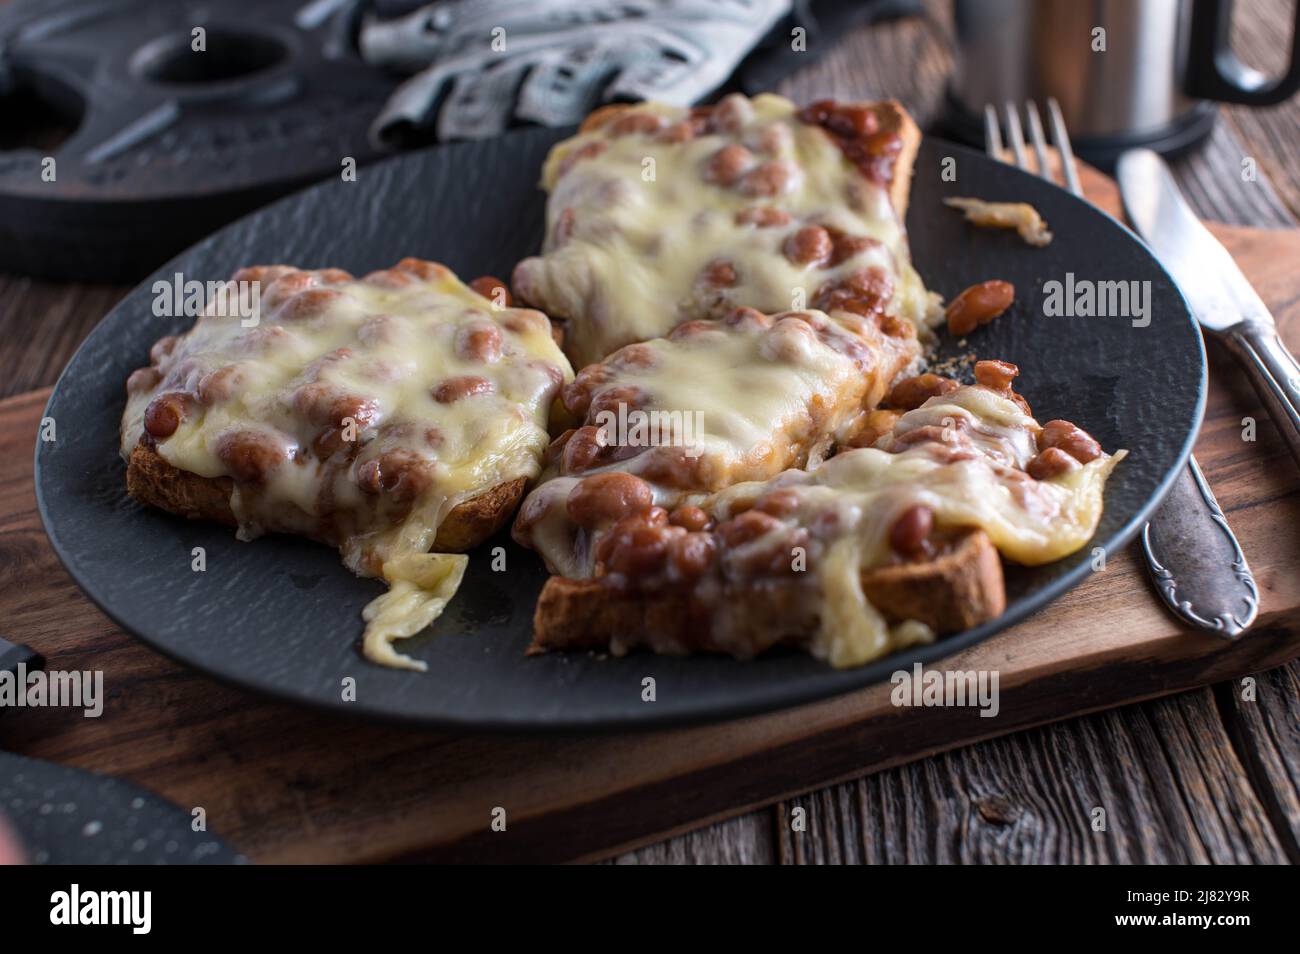 Fitness meal for muscle building with a whole grain toast with baked beans and light cheese on a plate Stock Photo